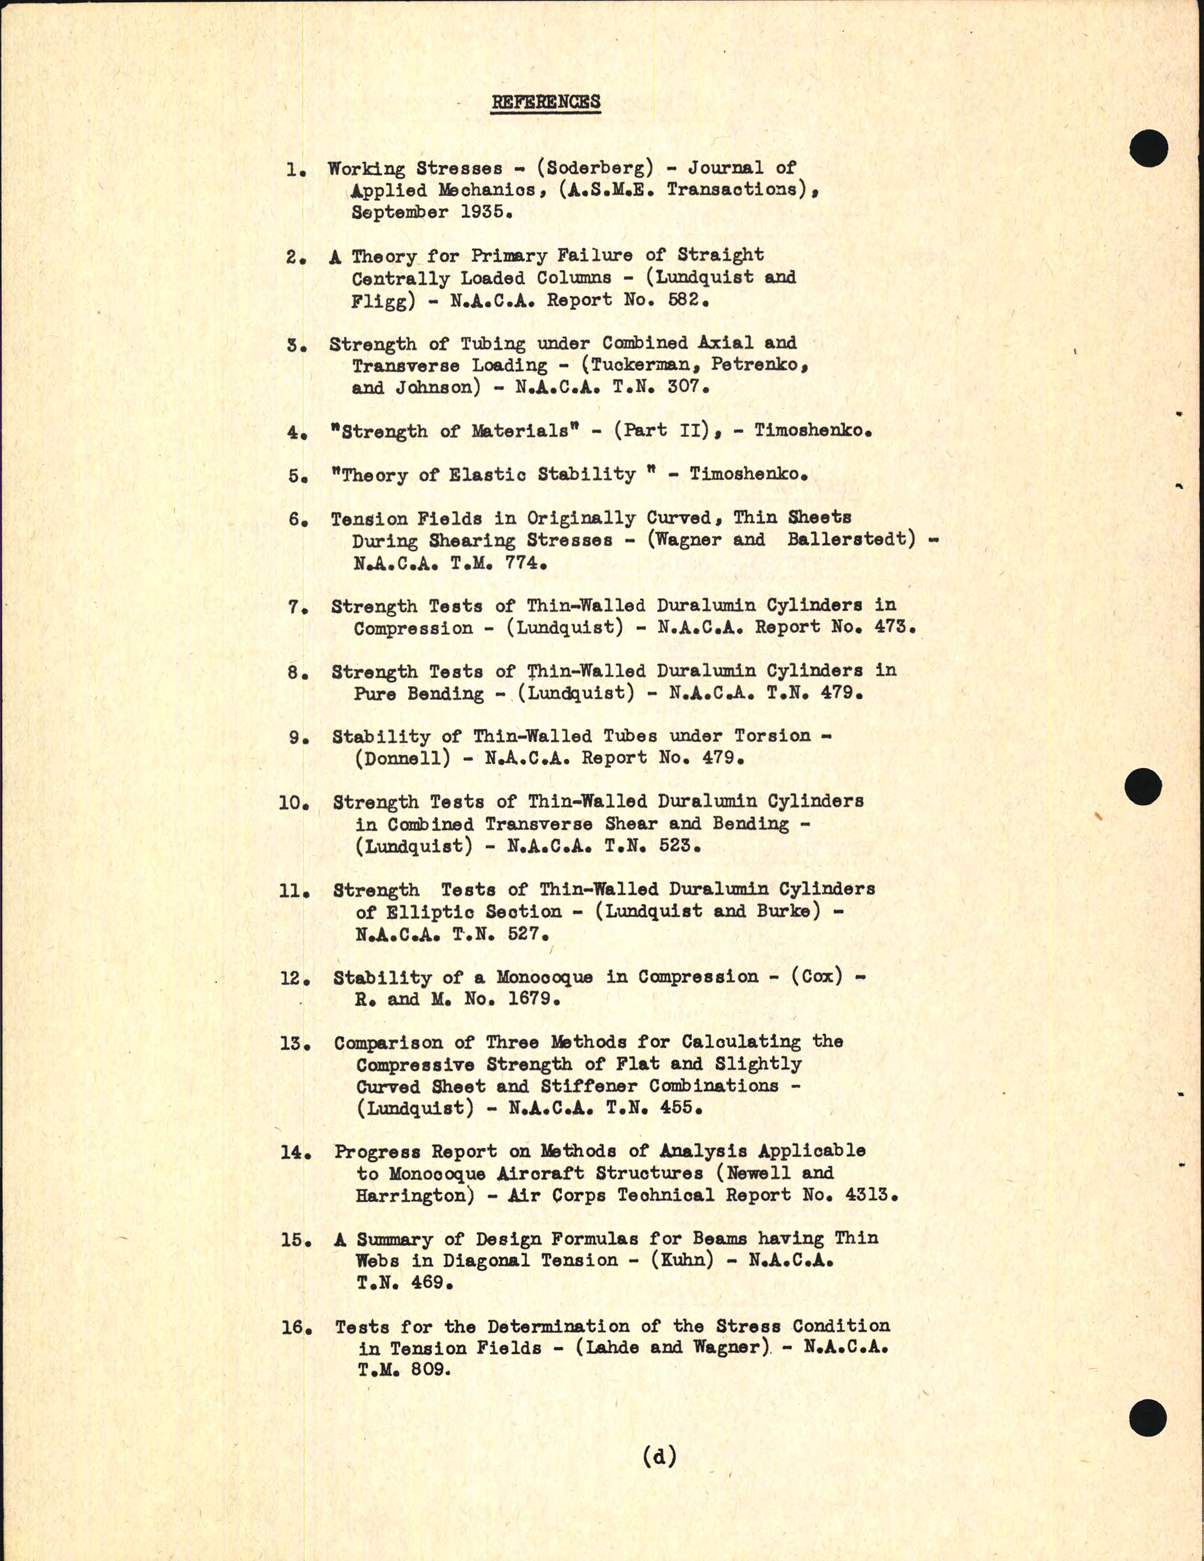 Sample page 6 from AirCorps Library document: Strength of Aircraft Elements